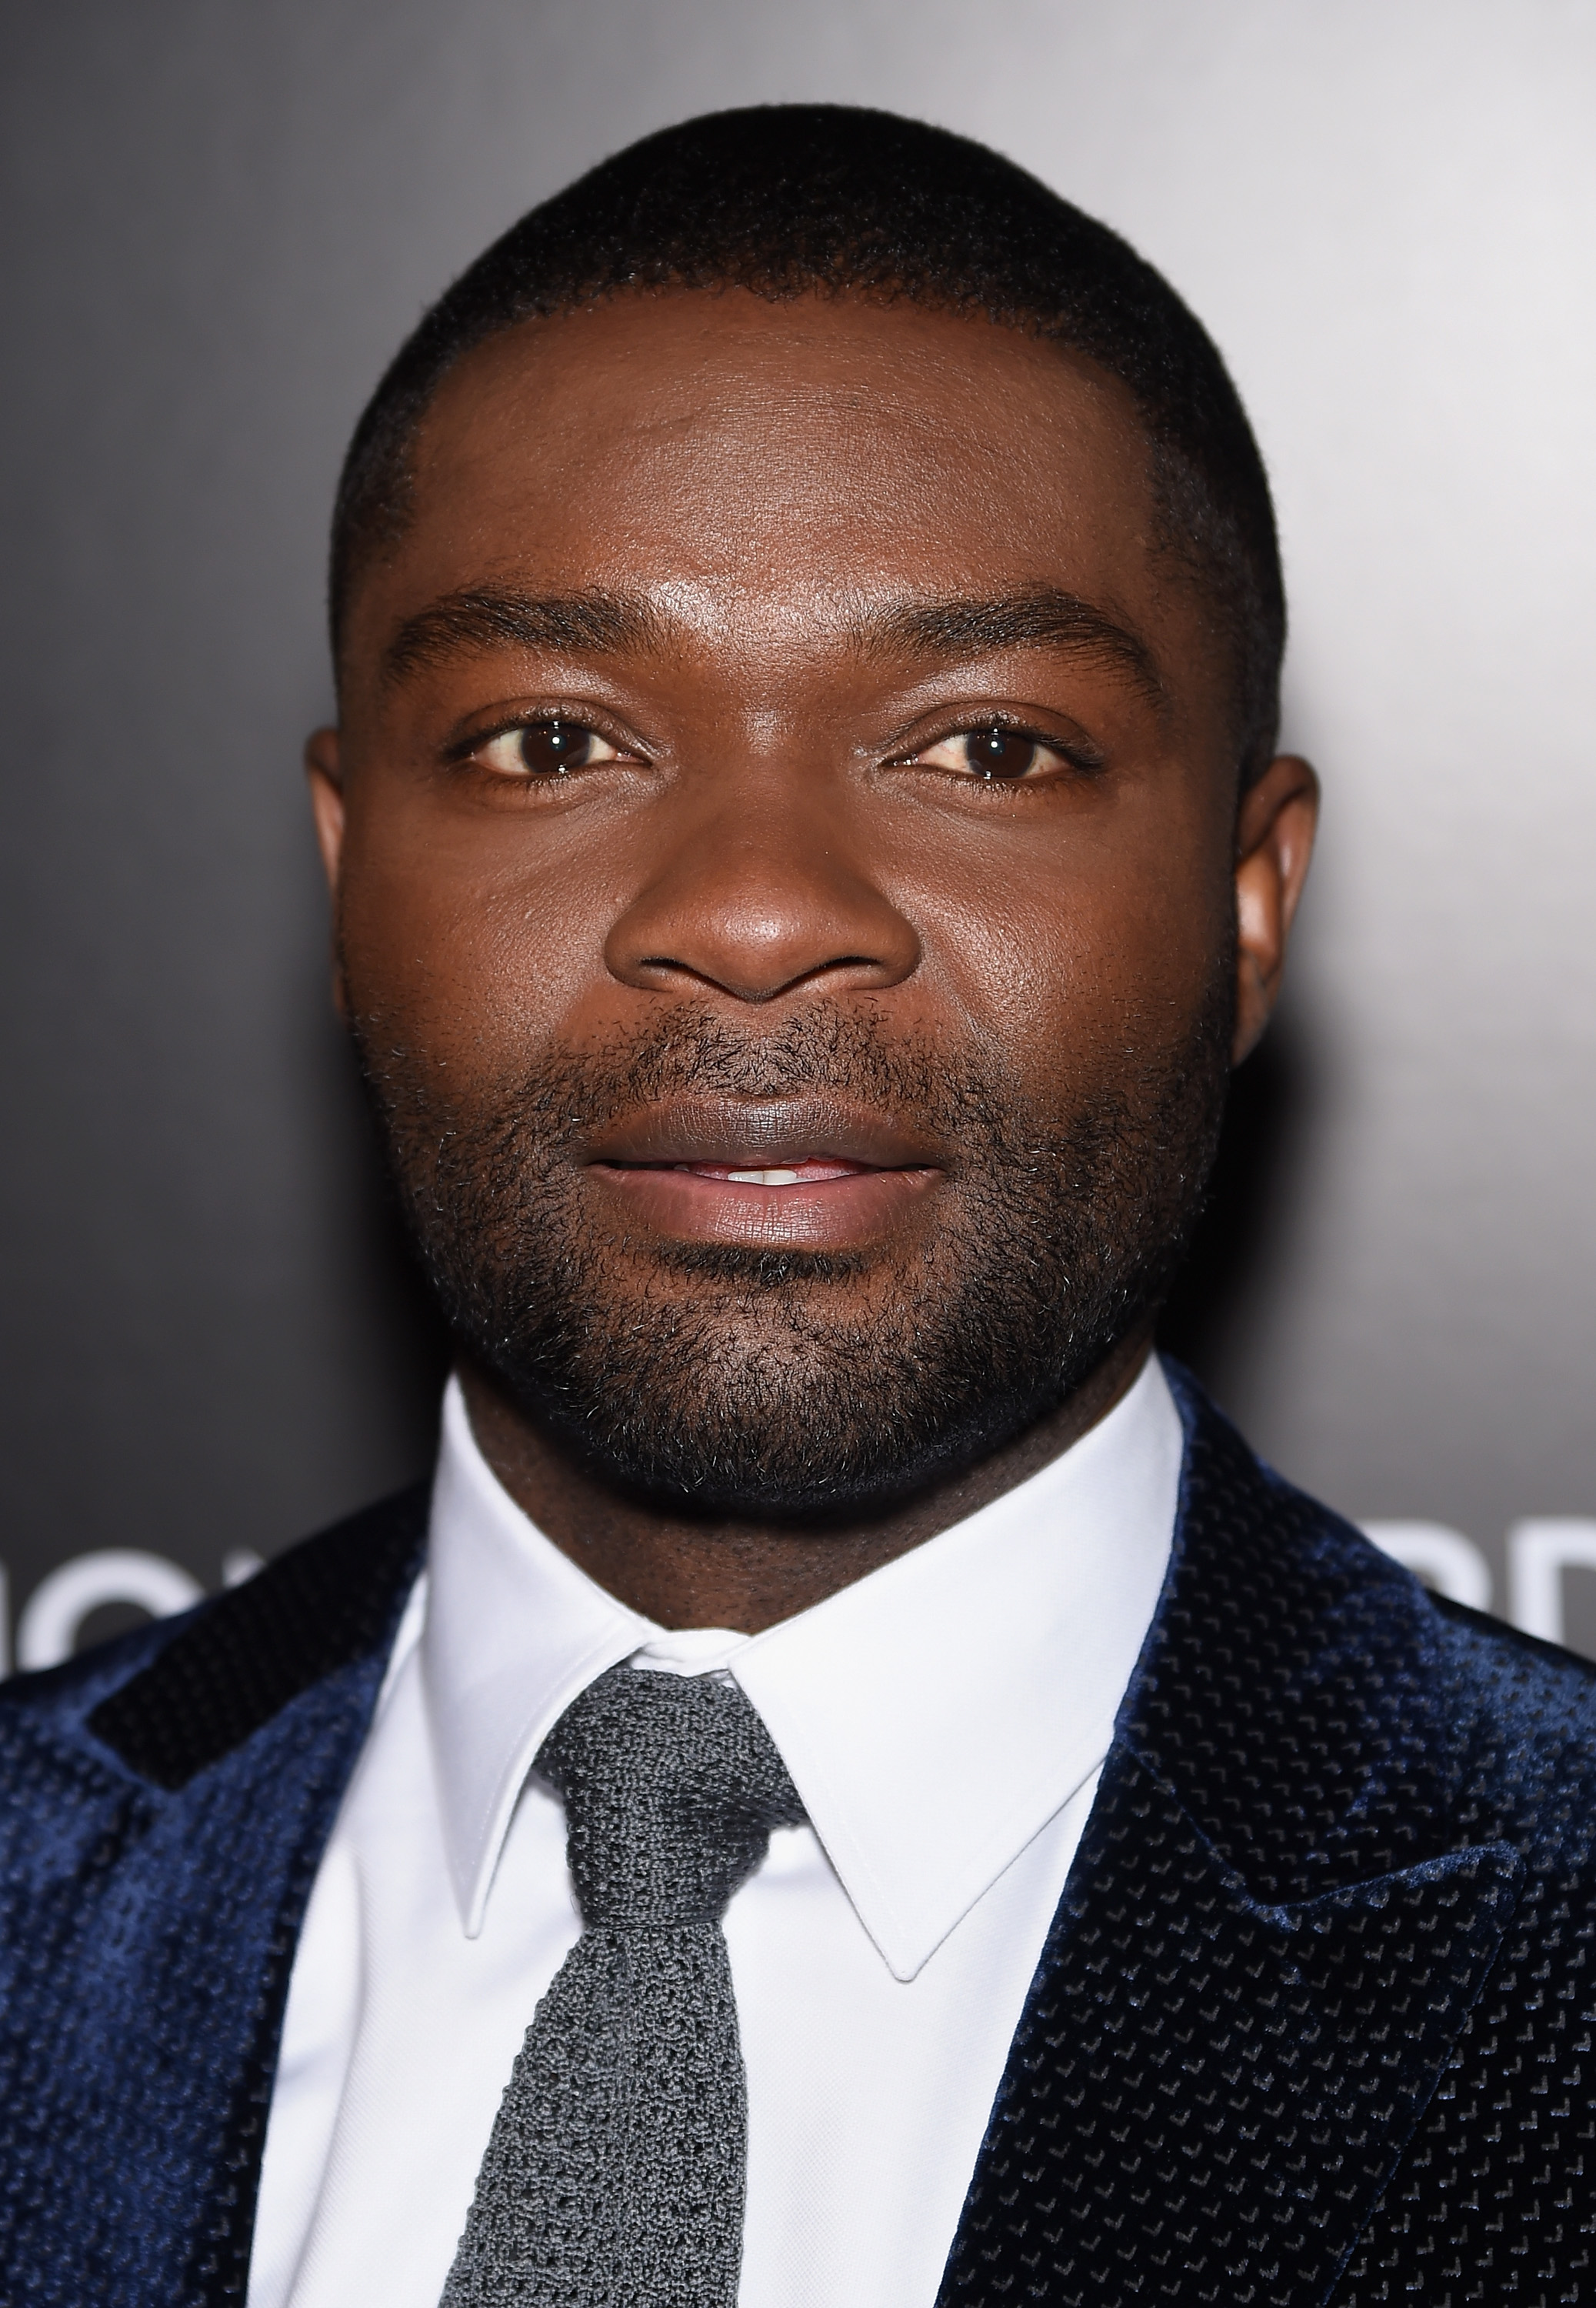 David Oyelowo attends the 2014 National Board of Review Gala on Jan. 6, 2015 in New York City.